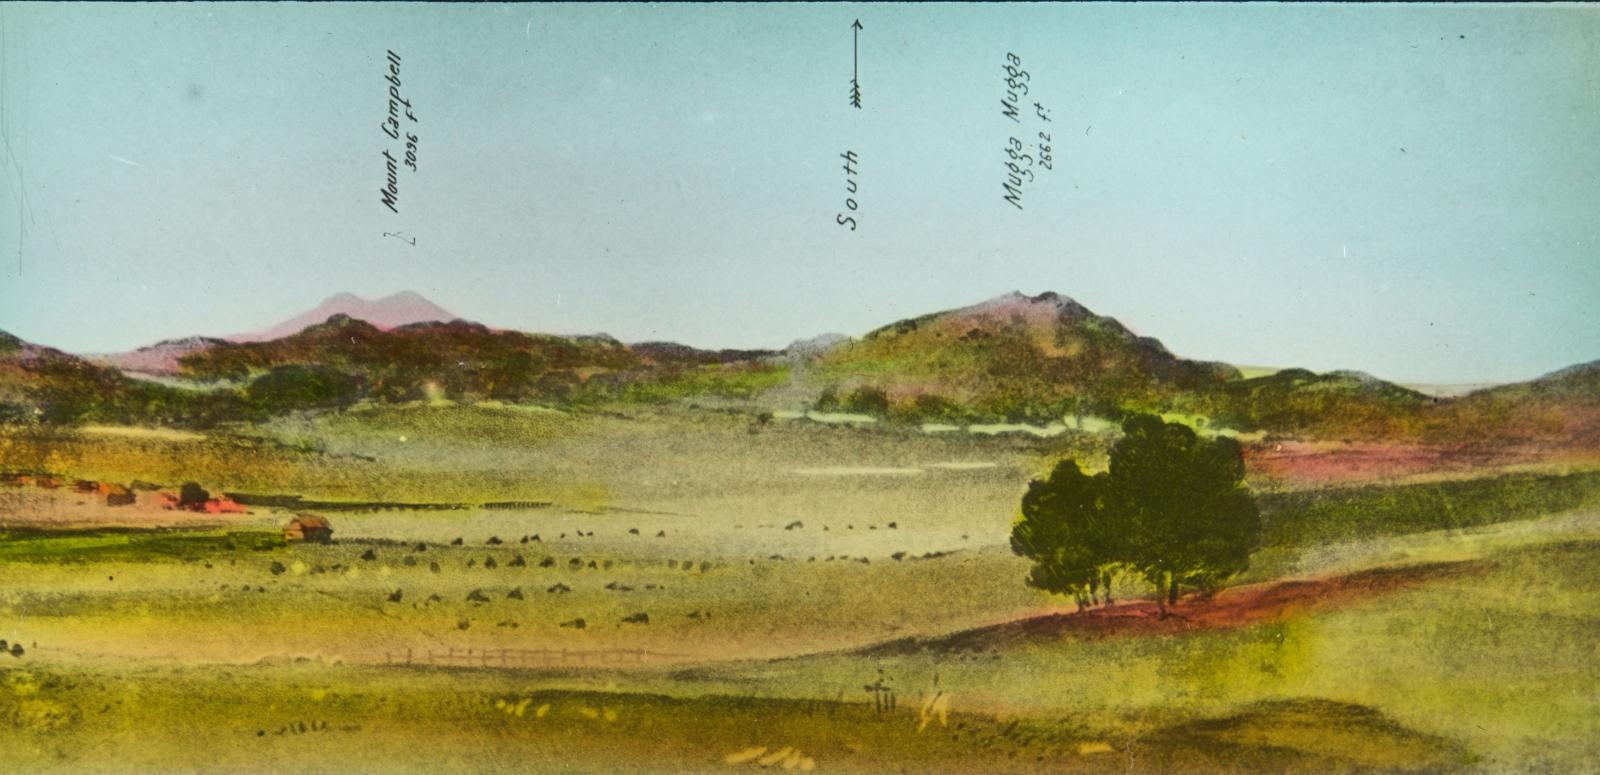 Painting of the Canberra landscape on a glass slide.